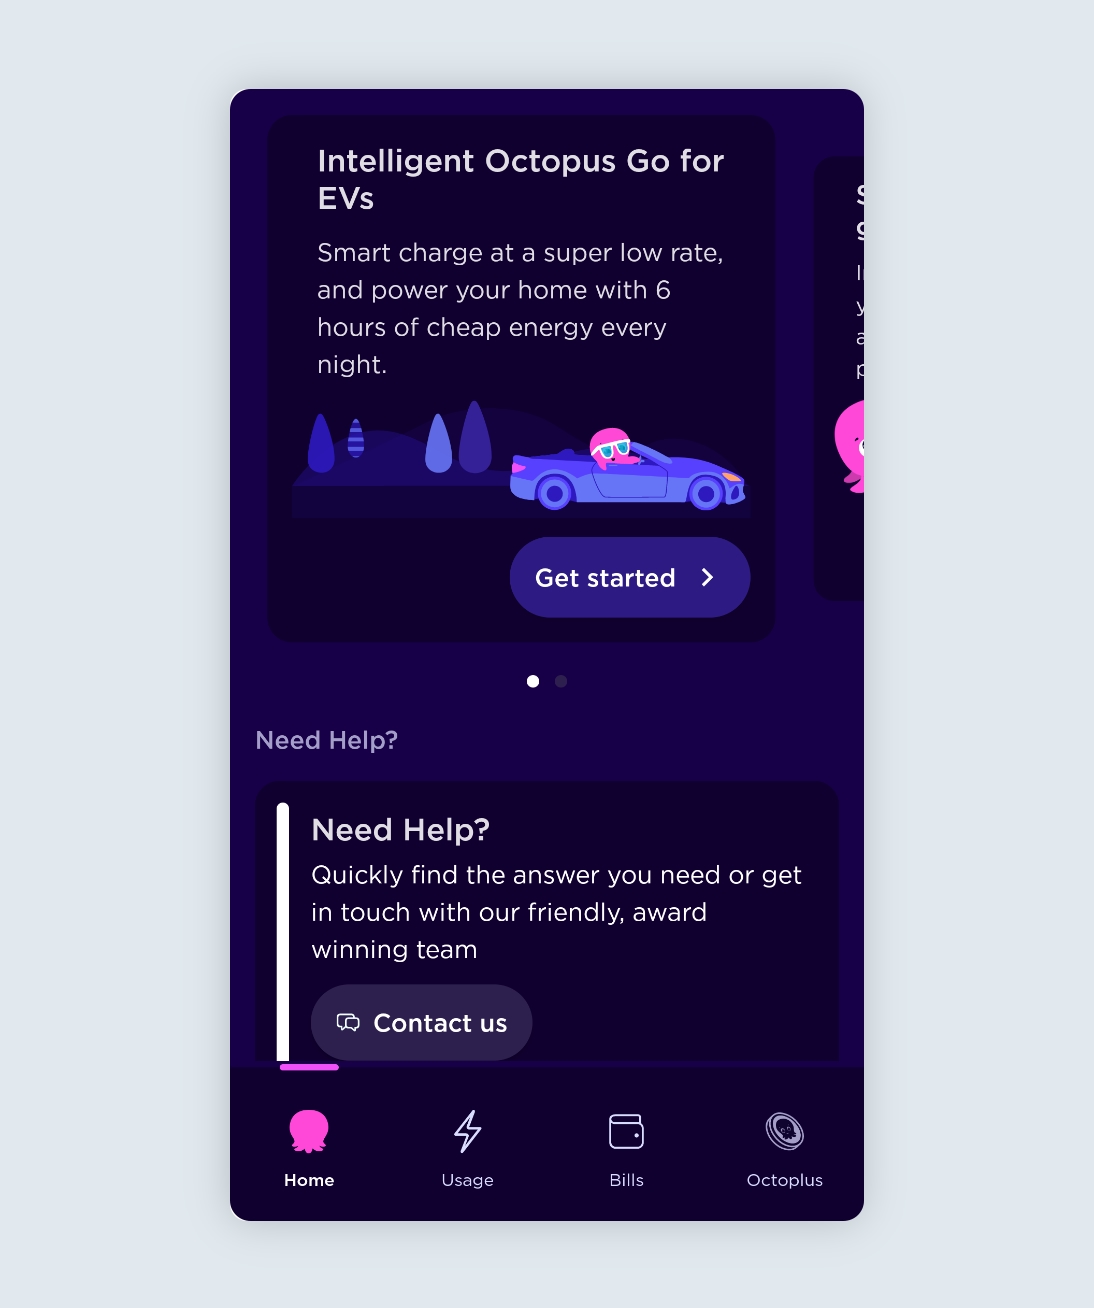 Octopus Energy app home tab Get started to integrate with Intelligent Octopus Go